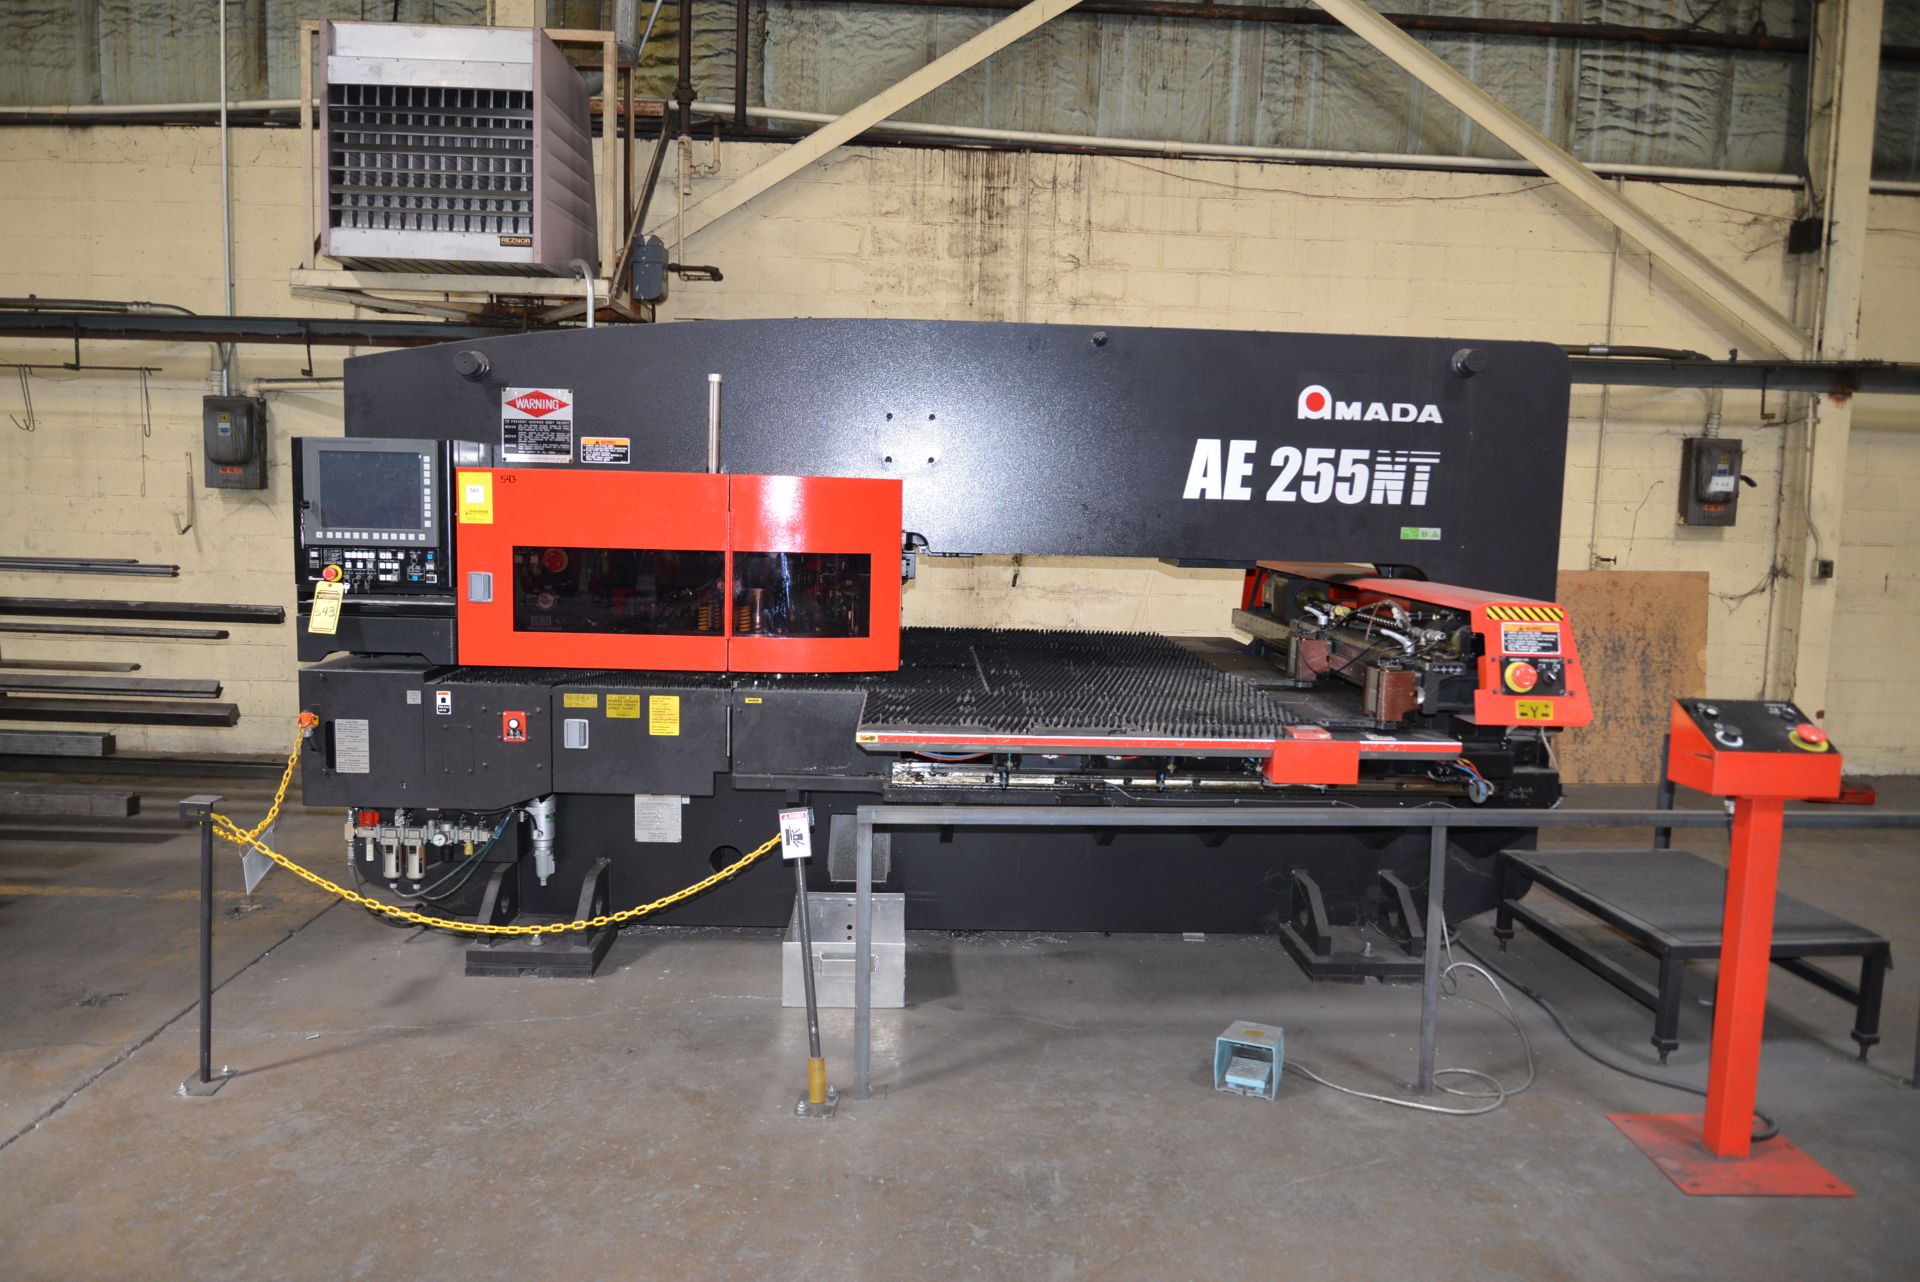 2013 AMADA AE255NT TURRET PUNCH; CAP/FORCE 200 KN, 45 TURRET STATIONS, POWER REQUIREMENT 19 KVA,